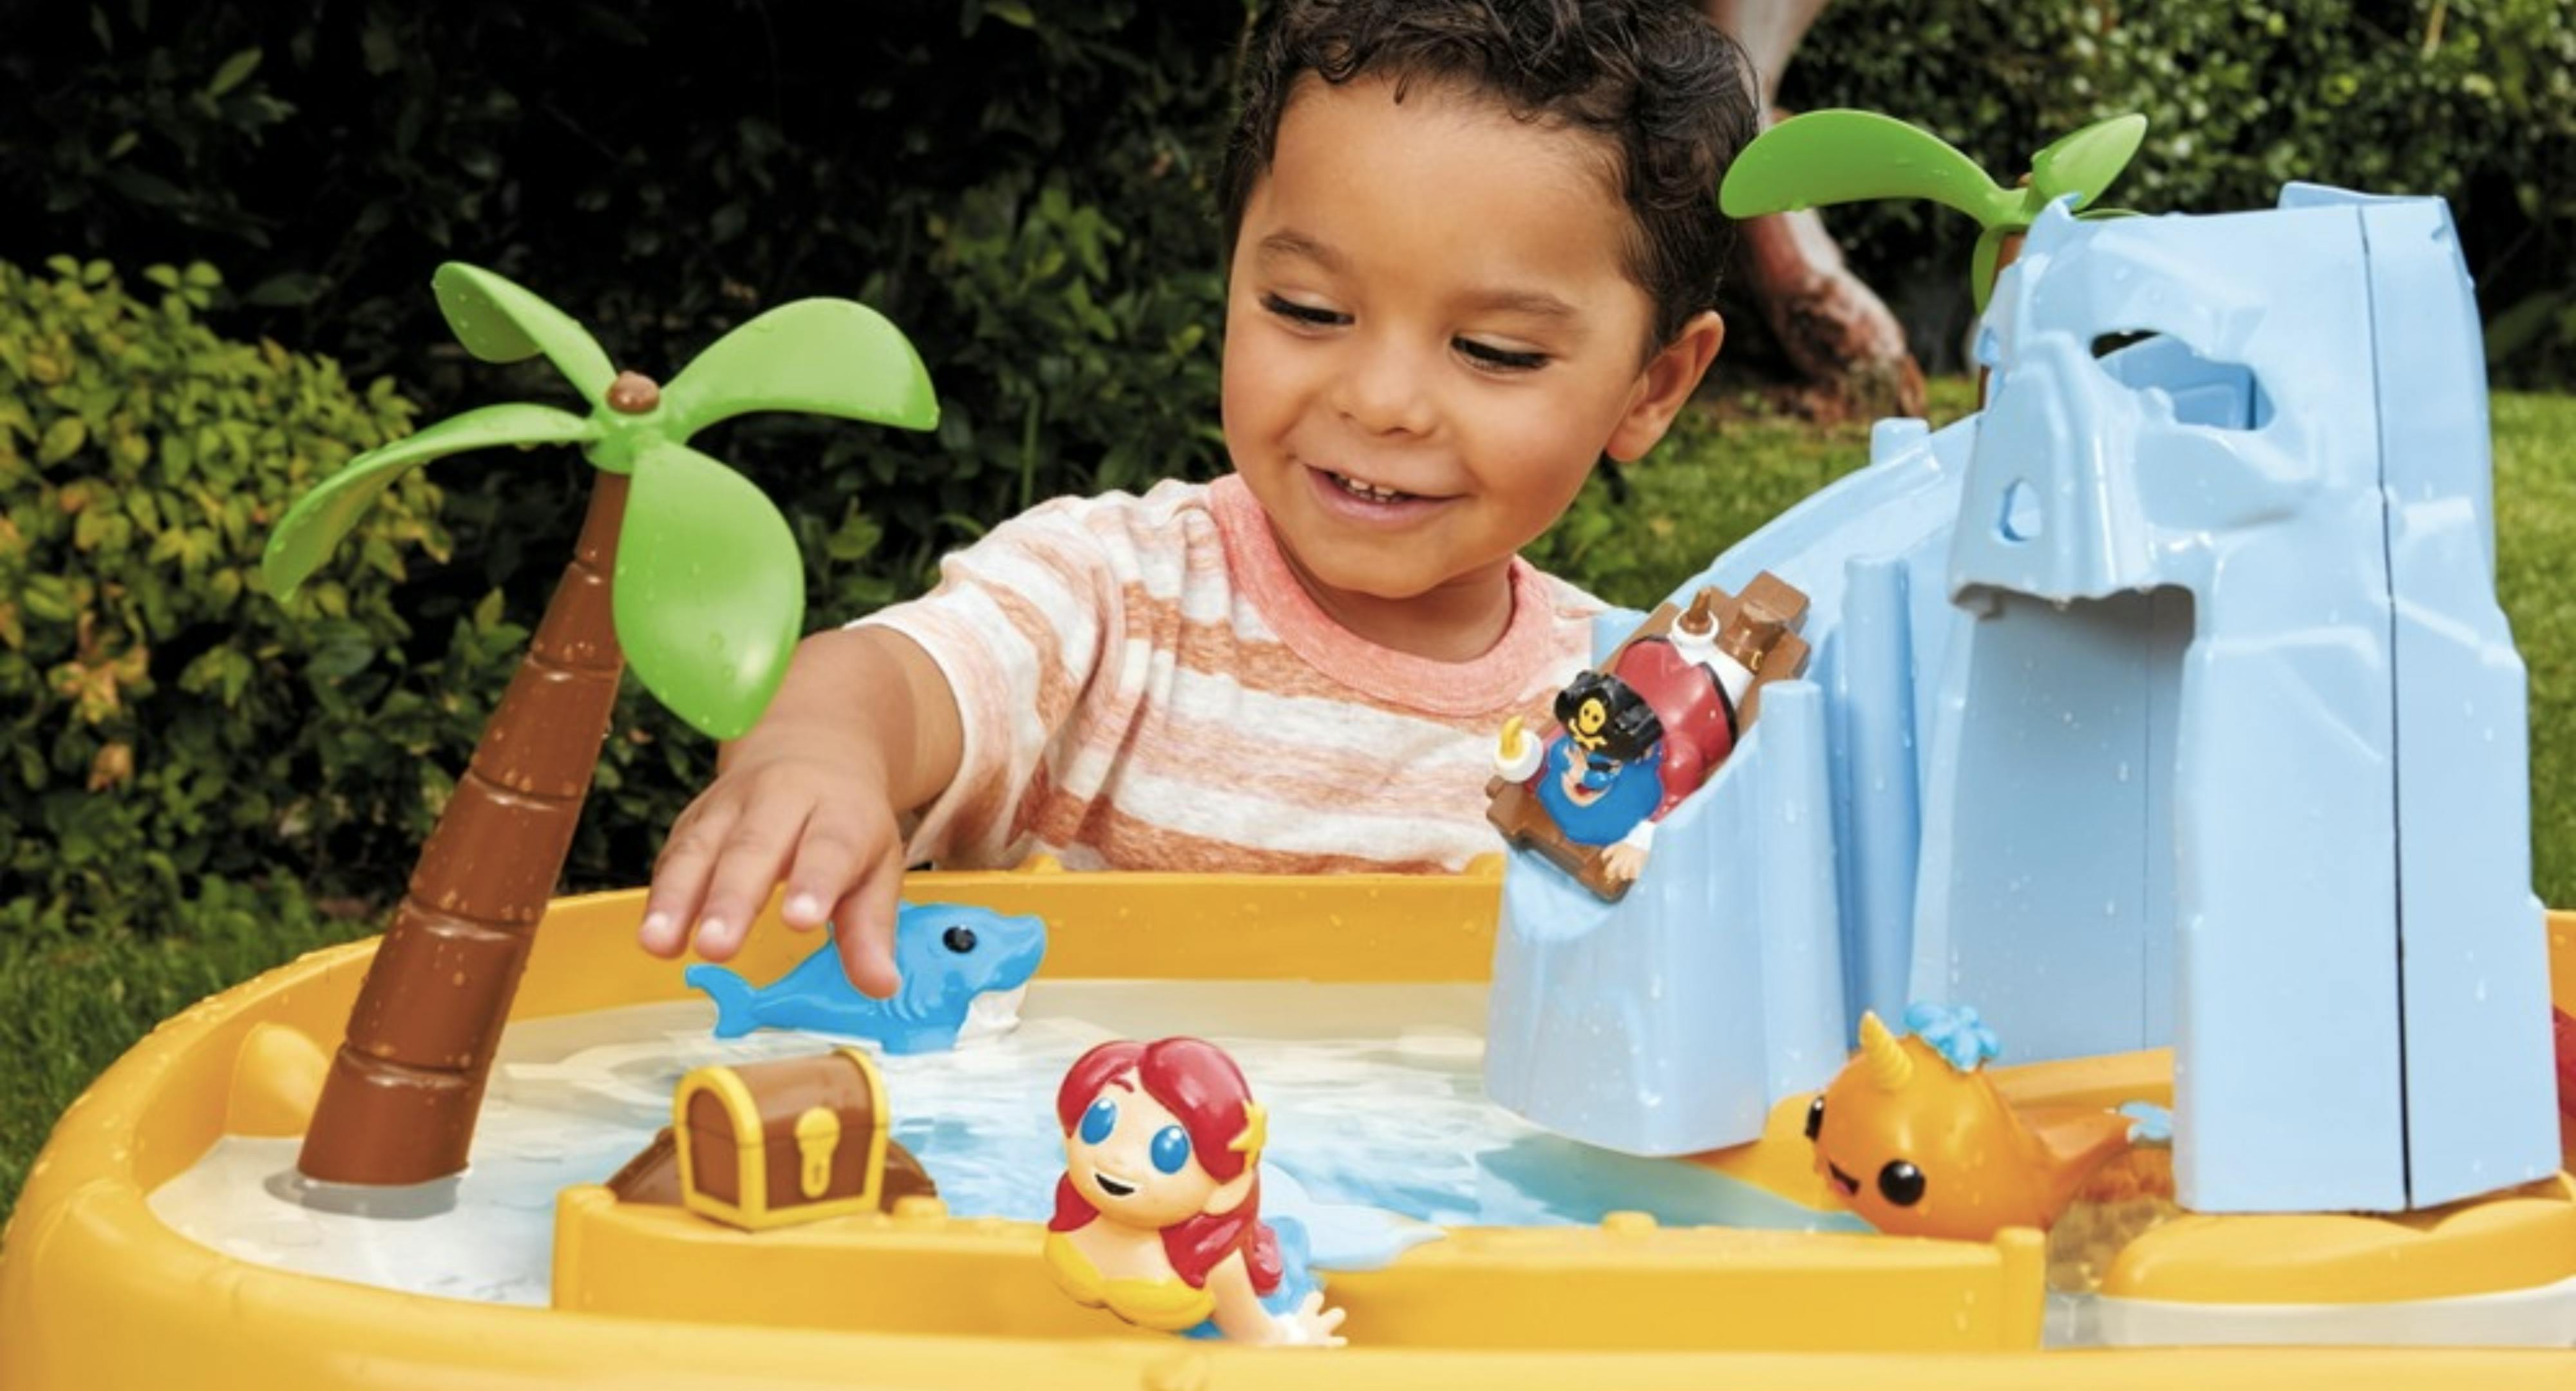 Tanga Little Tikes Water Table Featured Image 1685649580 1685649580 